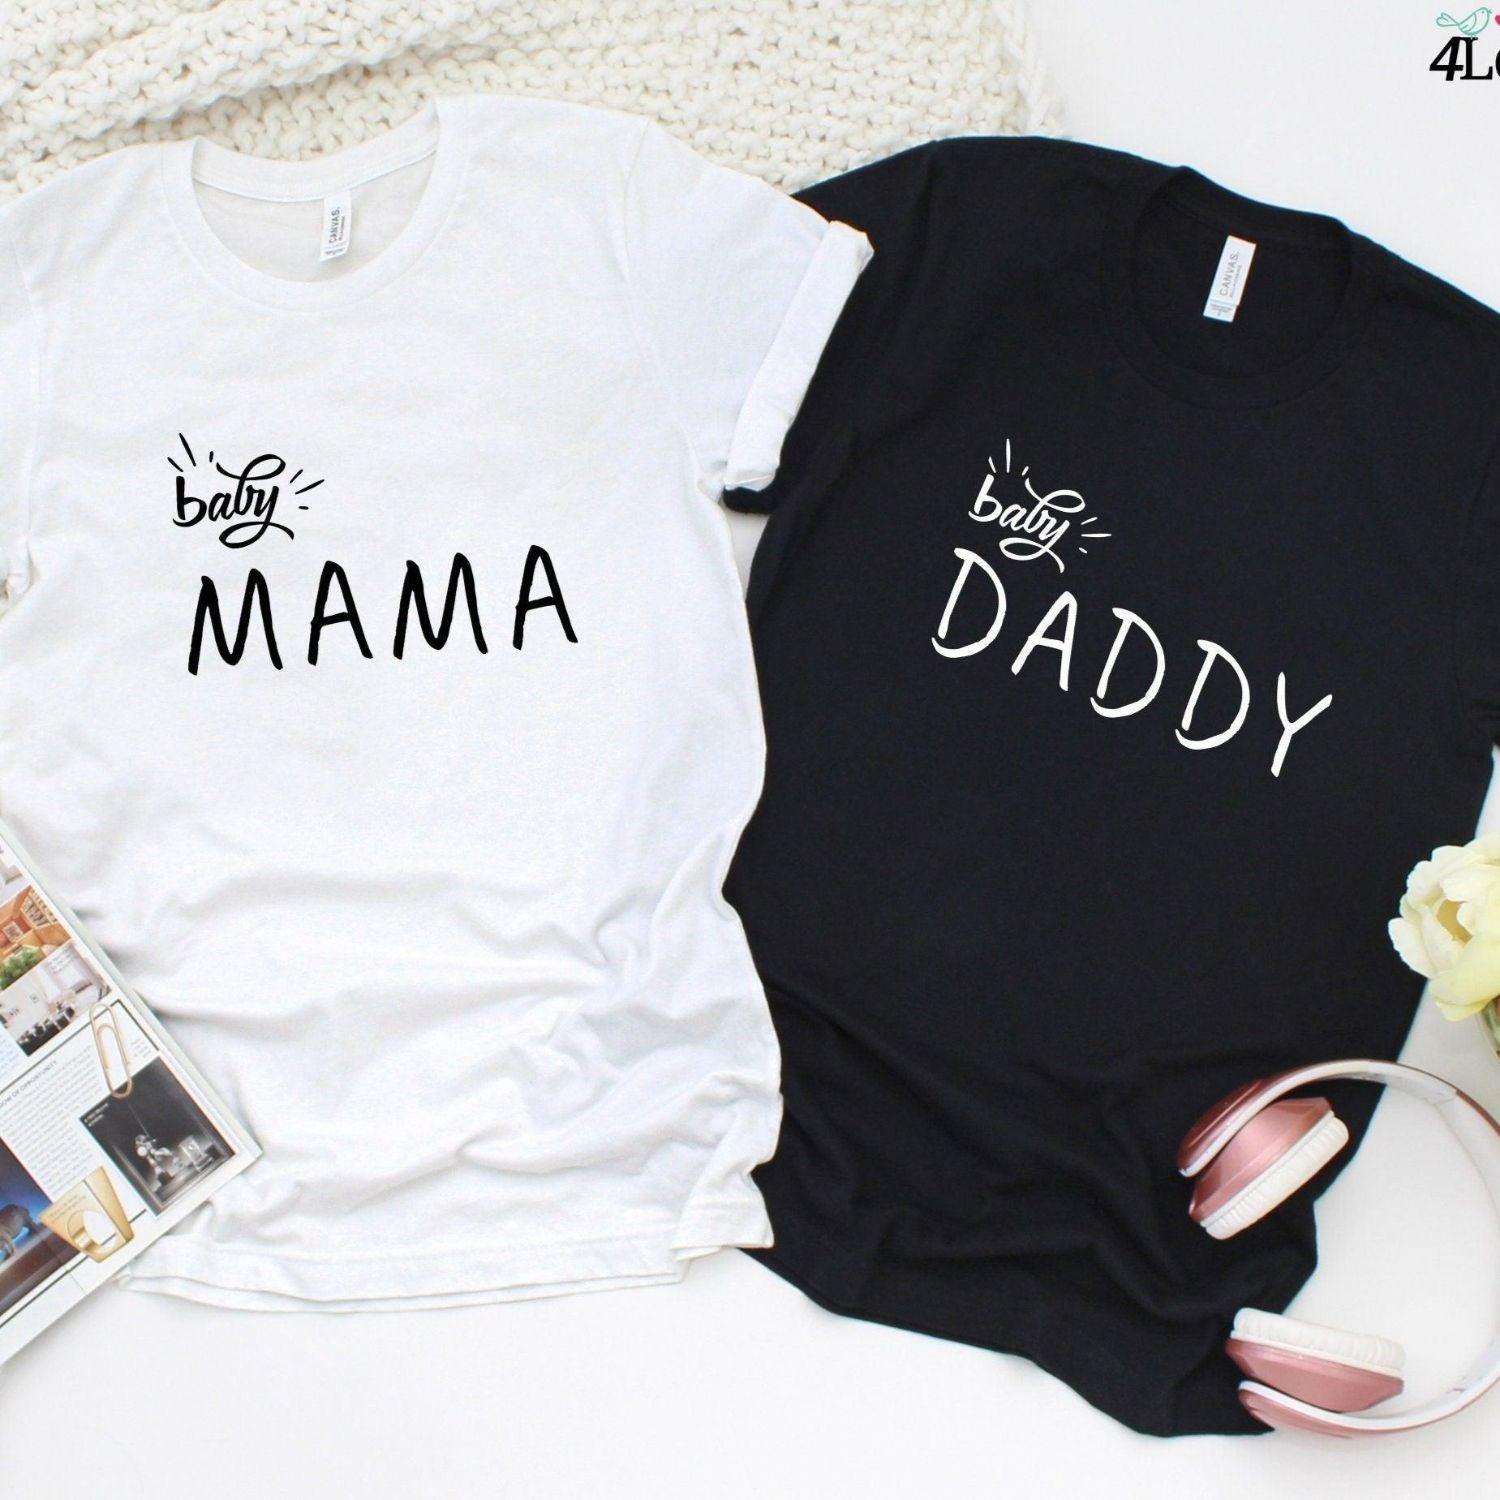 Baby Mama & Baby Daddy Matching Outfits | Pregnancy Reveal Set, New Parent Duo - 4Lovebirds